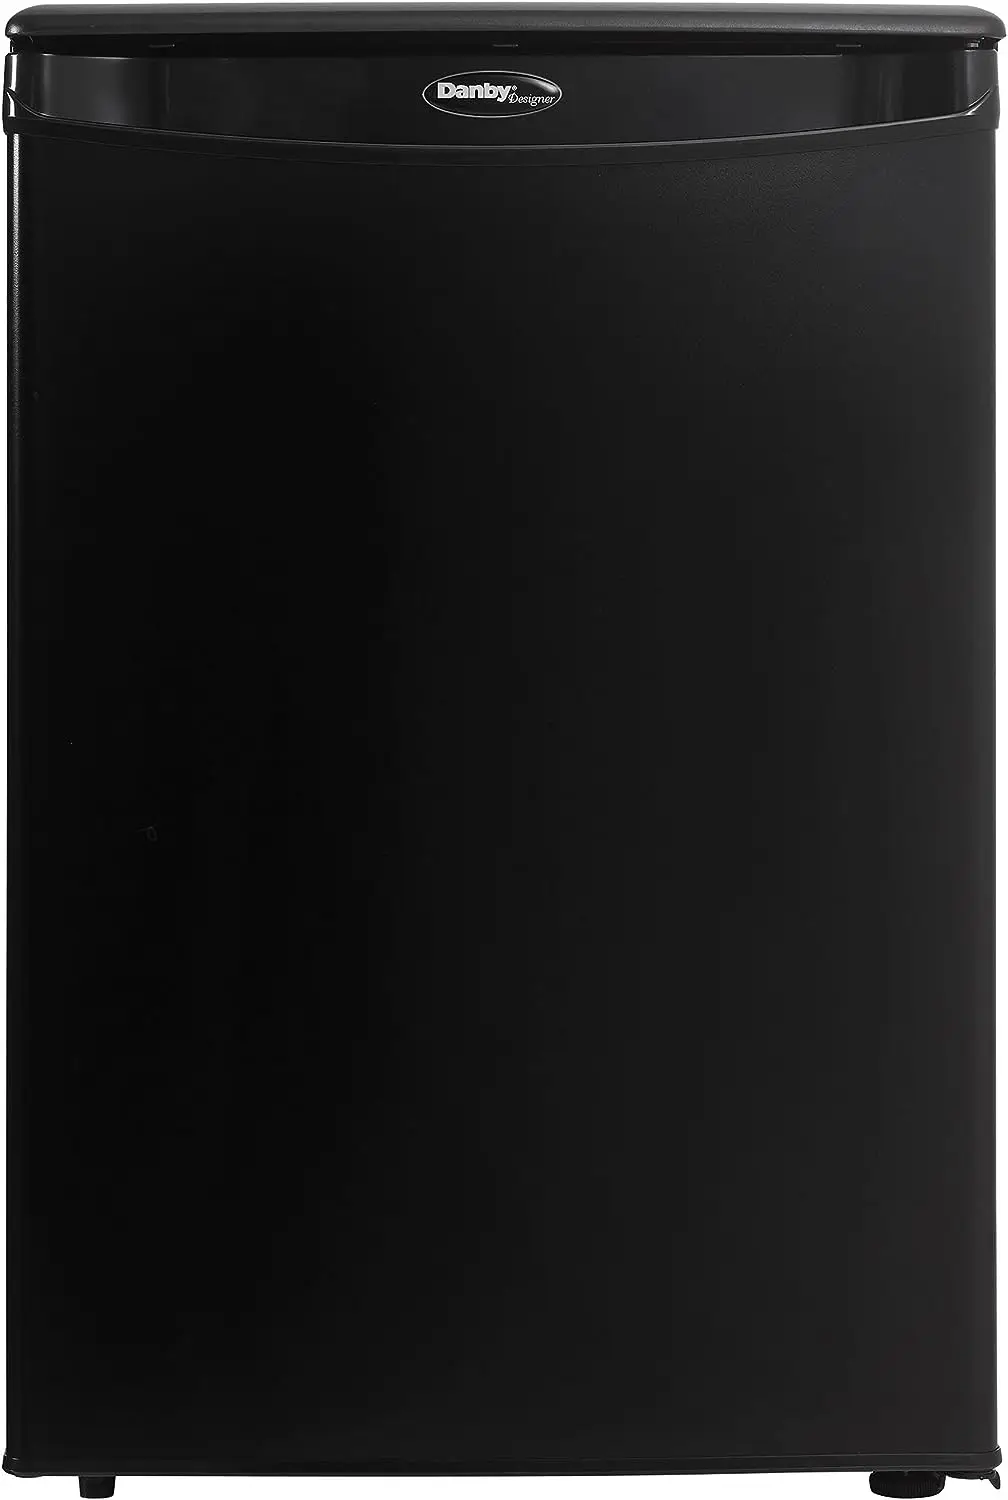 

2.6 Cu.Ft. Mini Fridge, Compact Refrigerator for Bedroom, Office, , countertop, E-Star Rated in Black